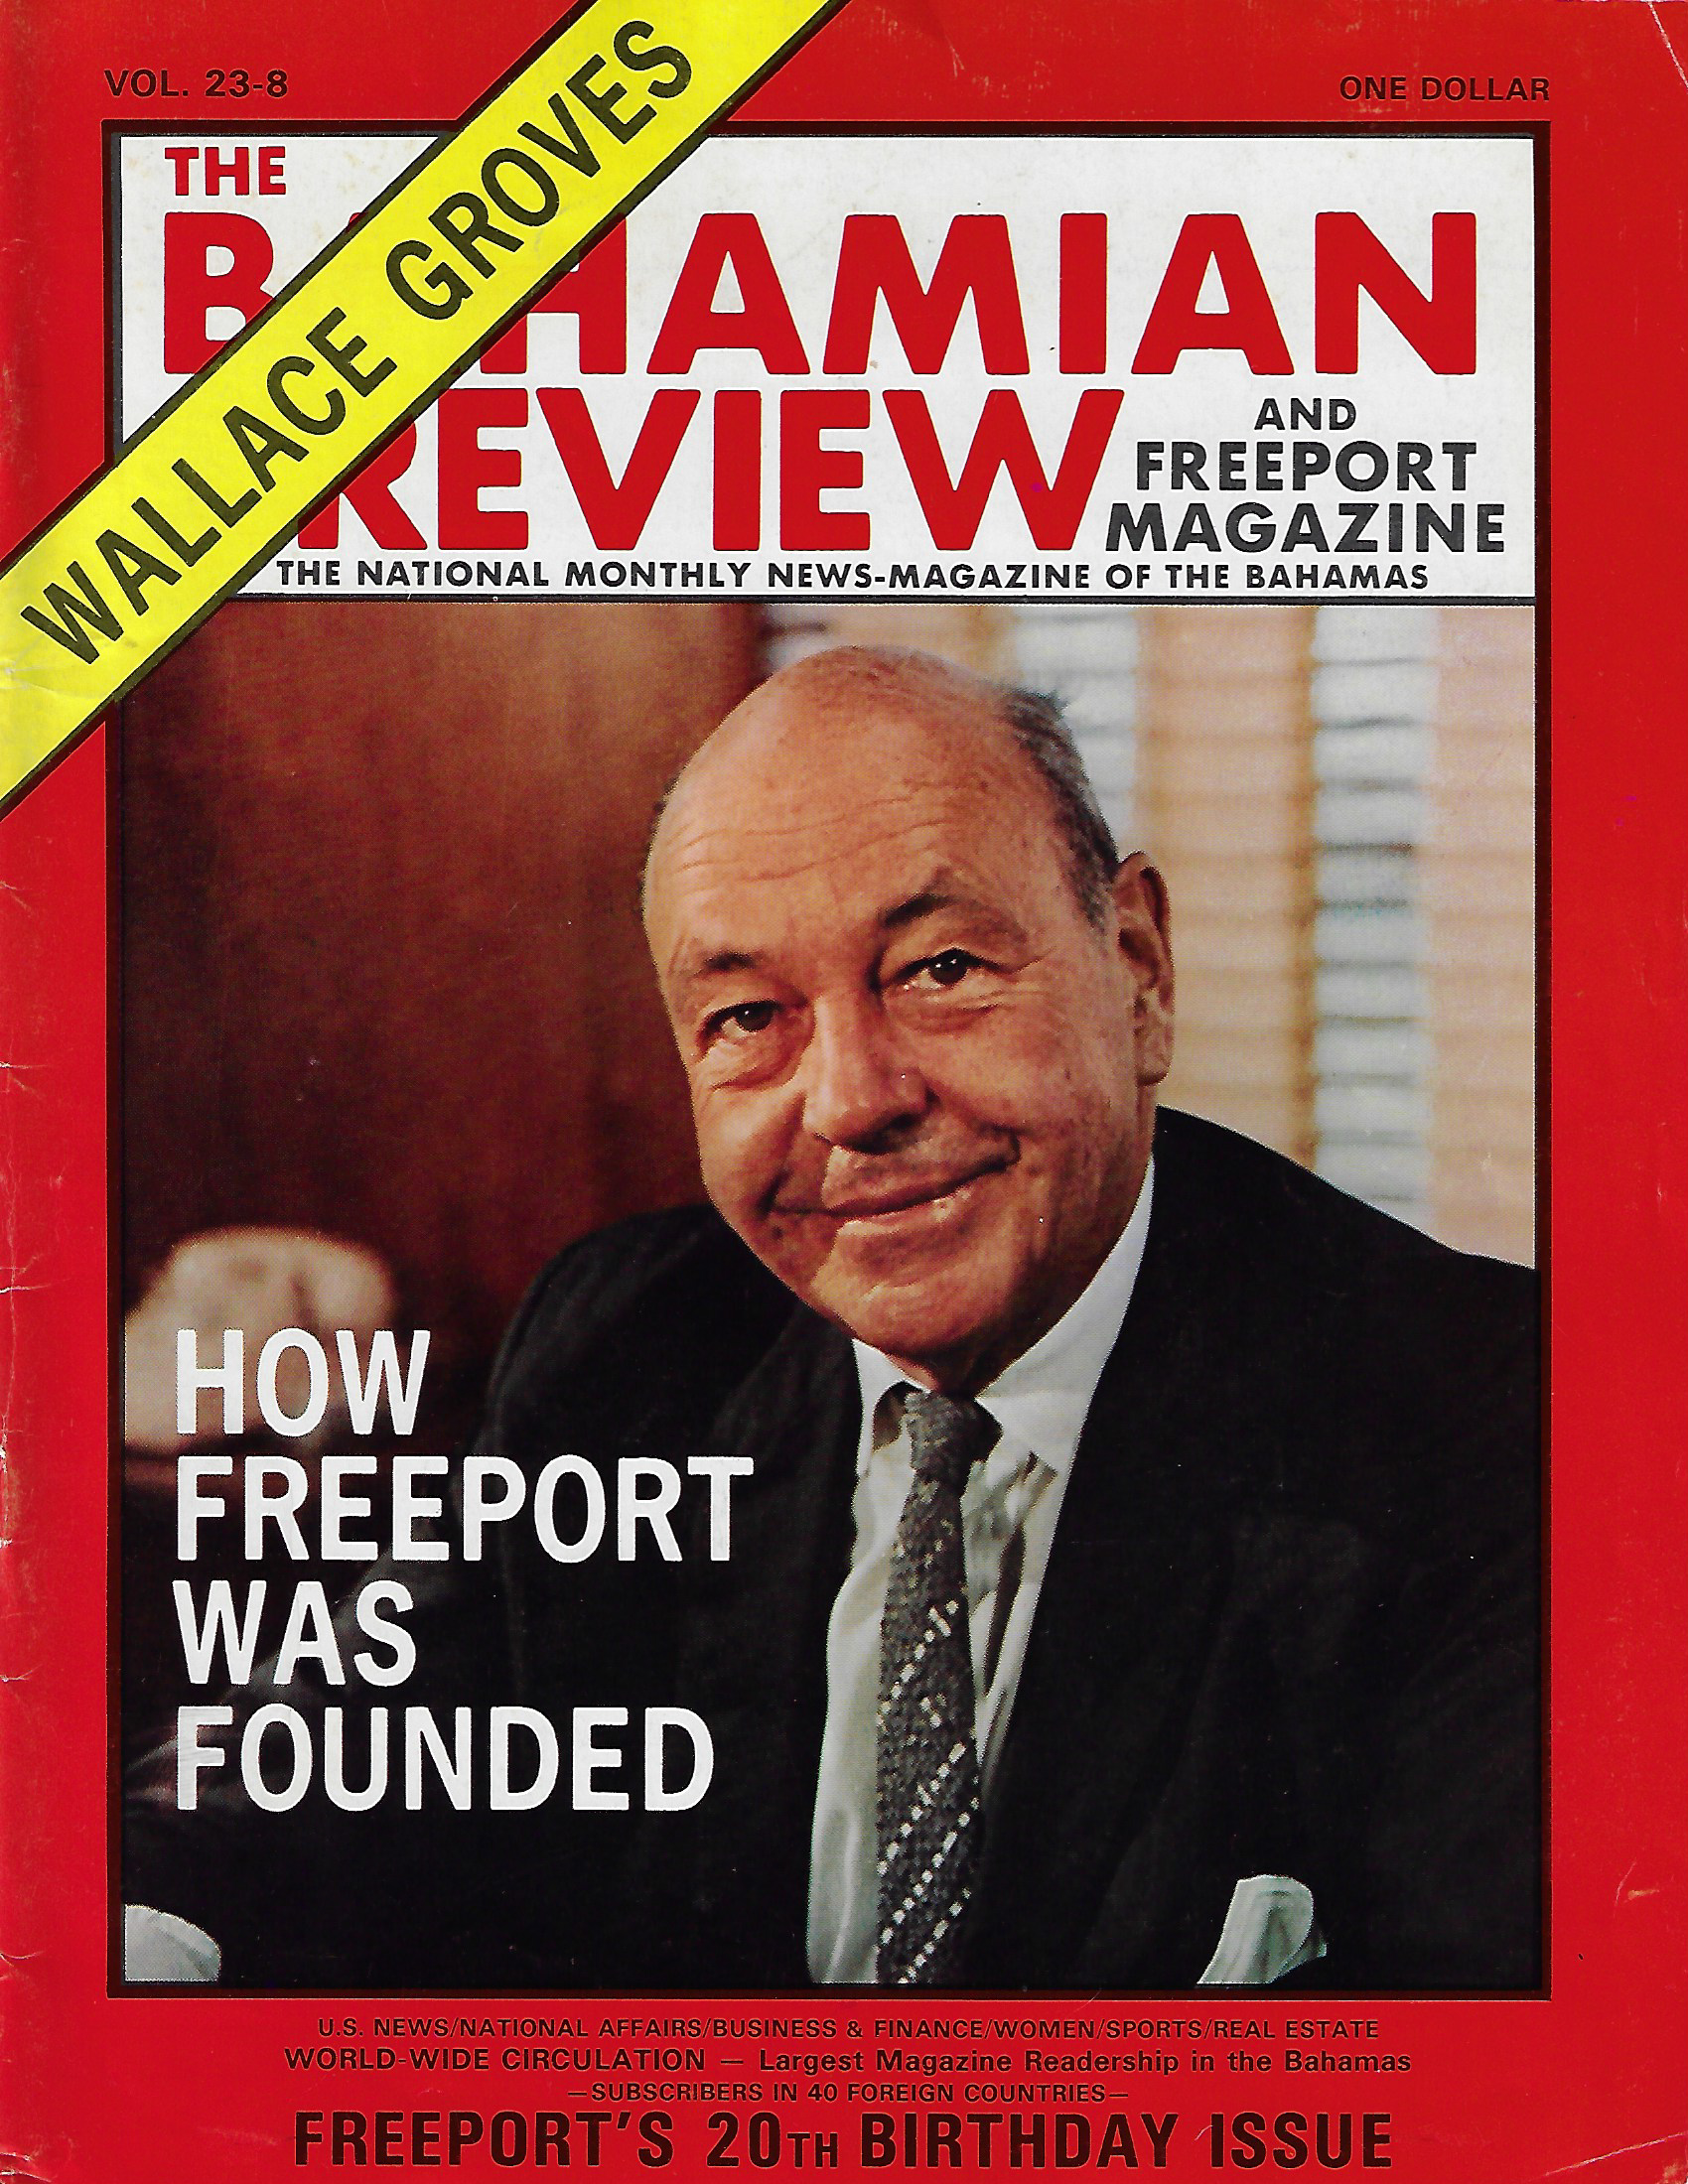 Wallace Groves - The Bahamian Review - Vol. 23 No. 8 - Cover - August-September 1975